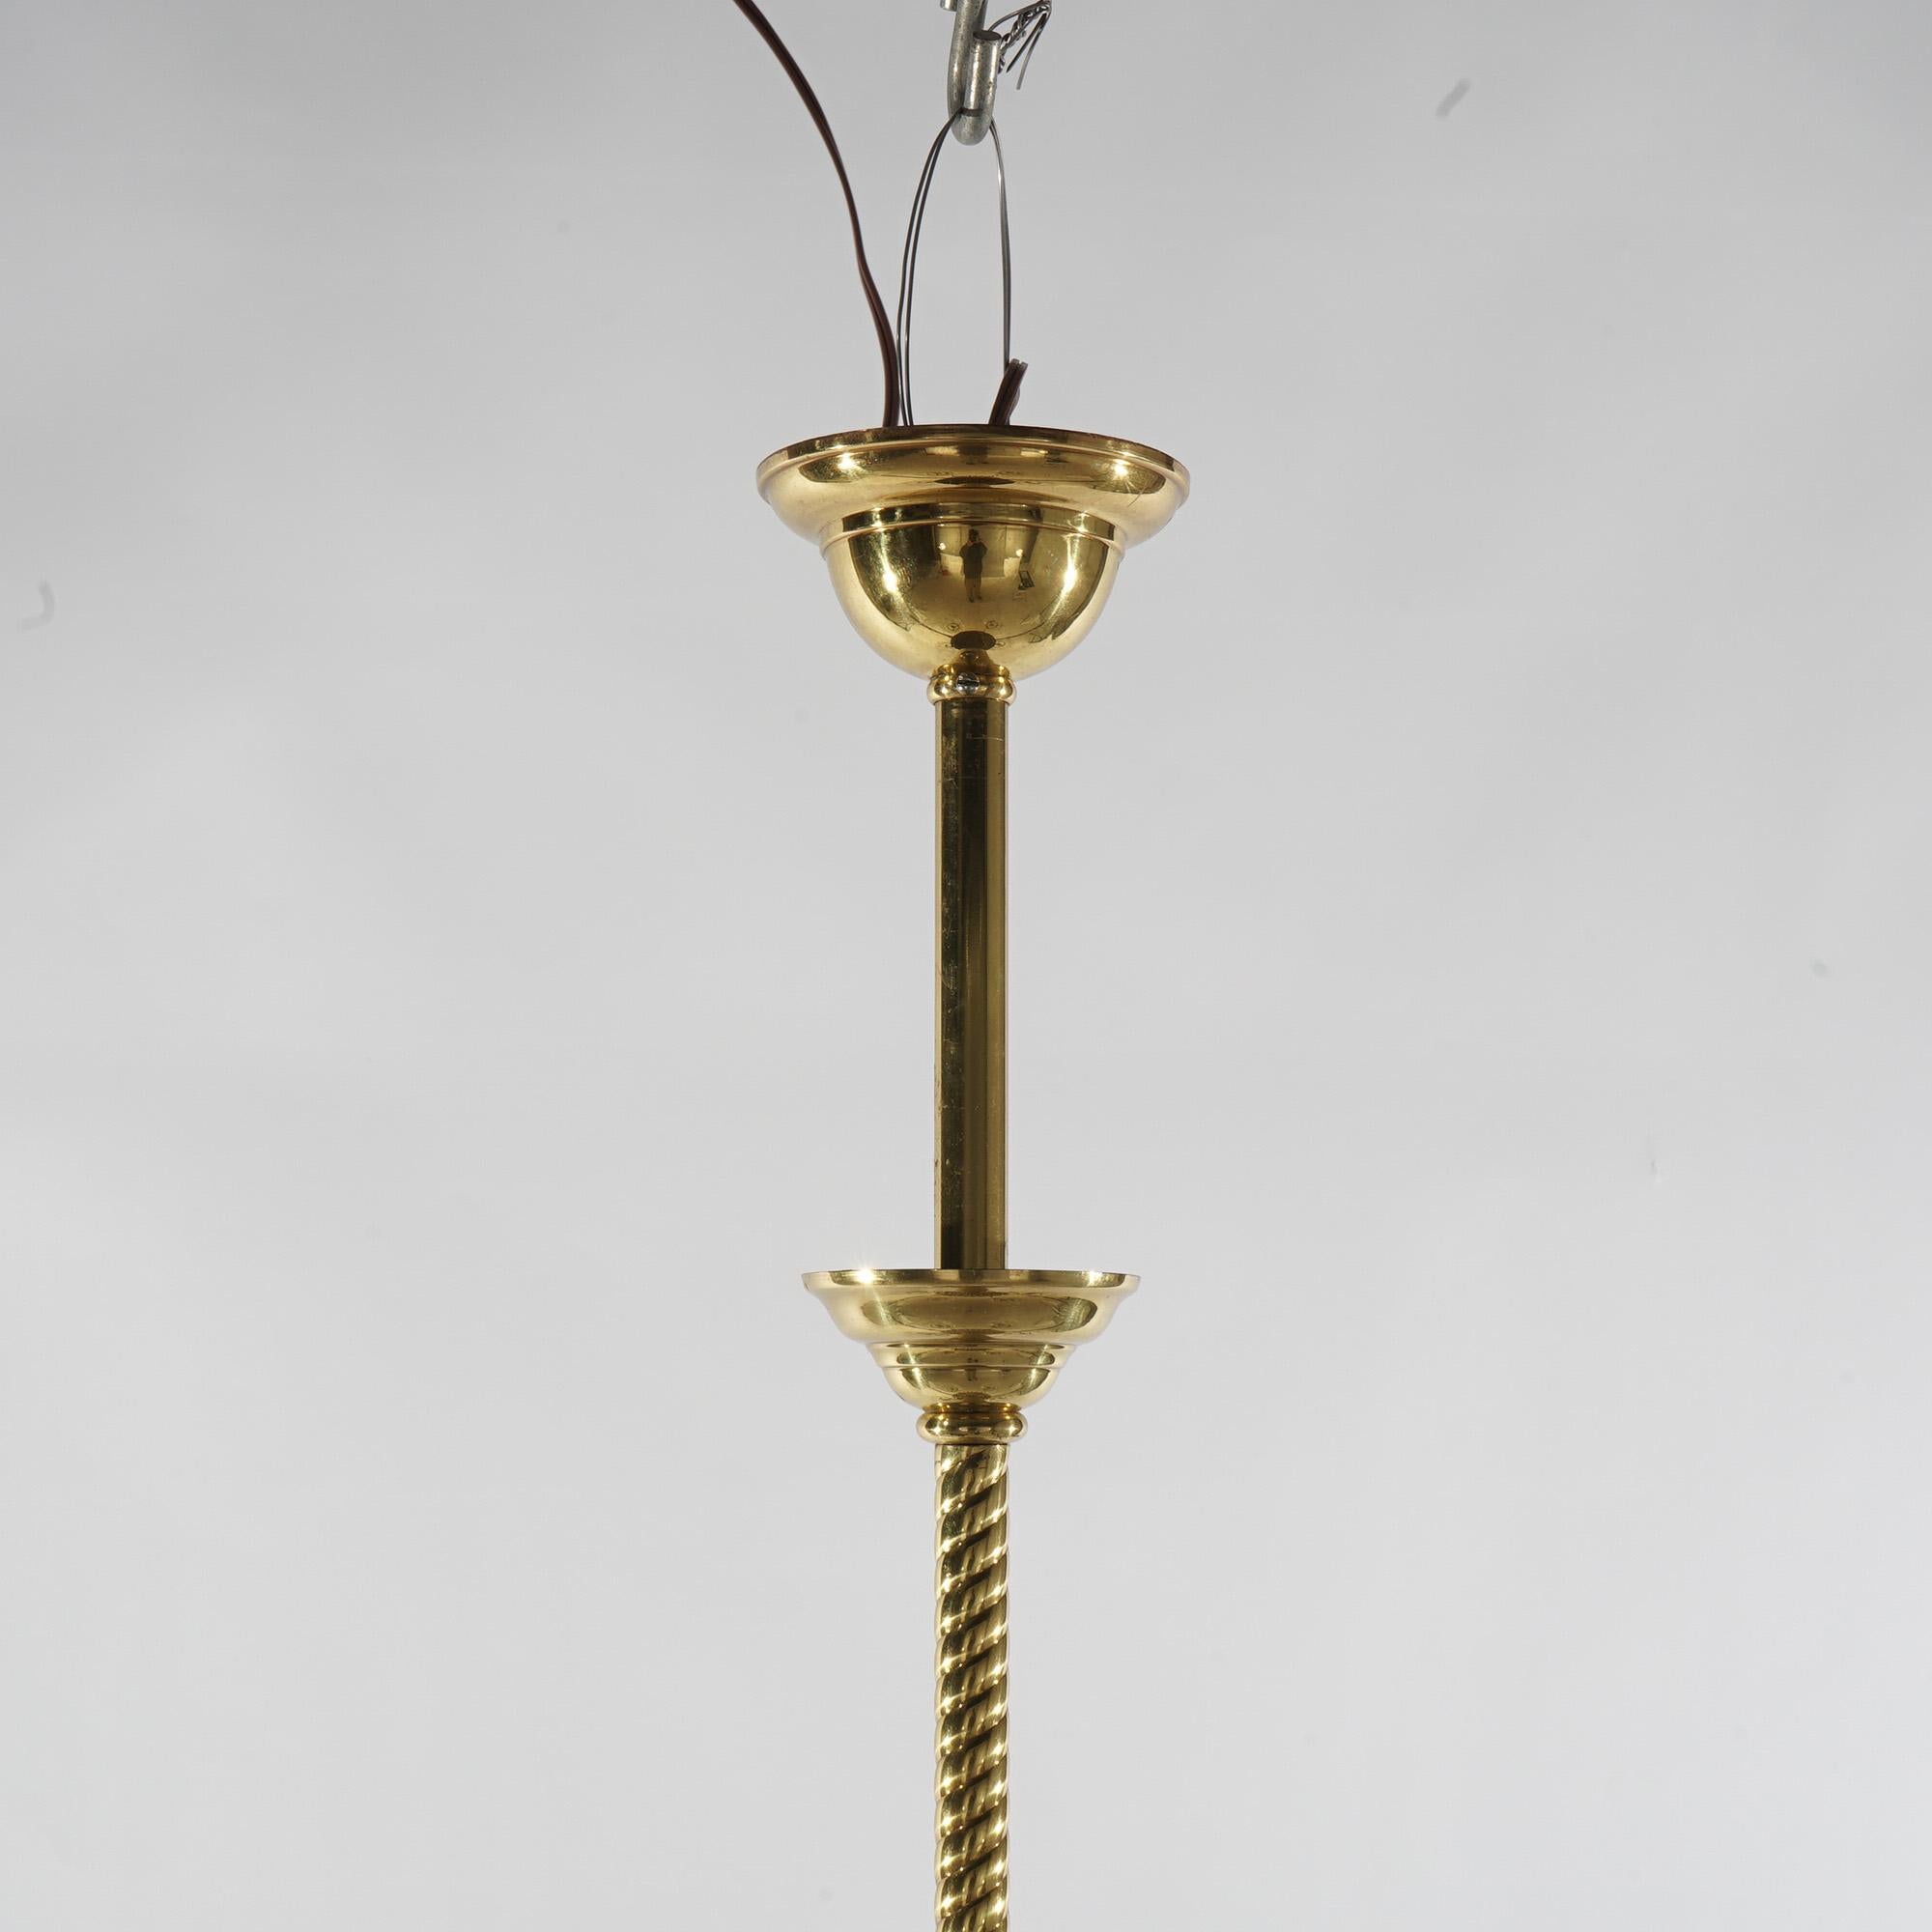 Antique Brass Four-Arm Gas Light Hanging Fixture with Glass Shades C1880 For Sale 2